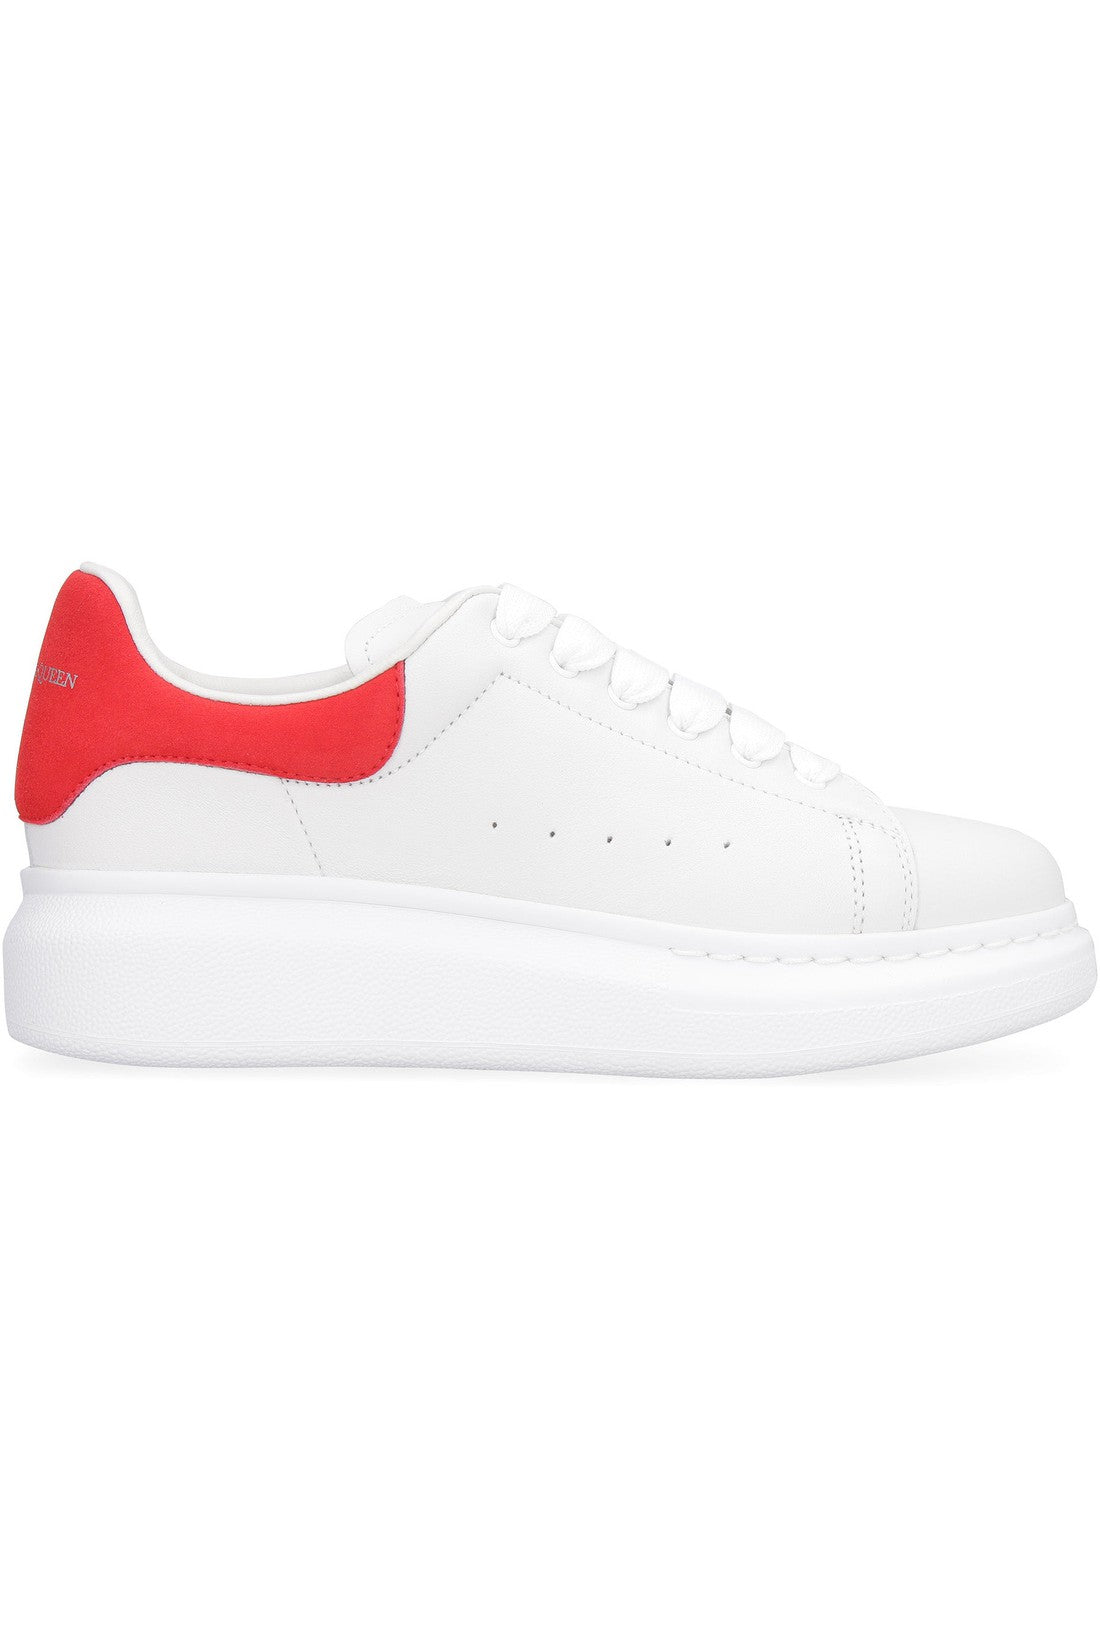 Piralo-OUTLET-SALE-Molly leather sneakers-ARCHIVIST